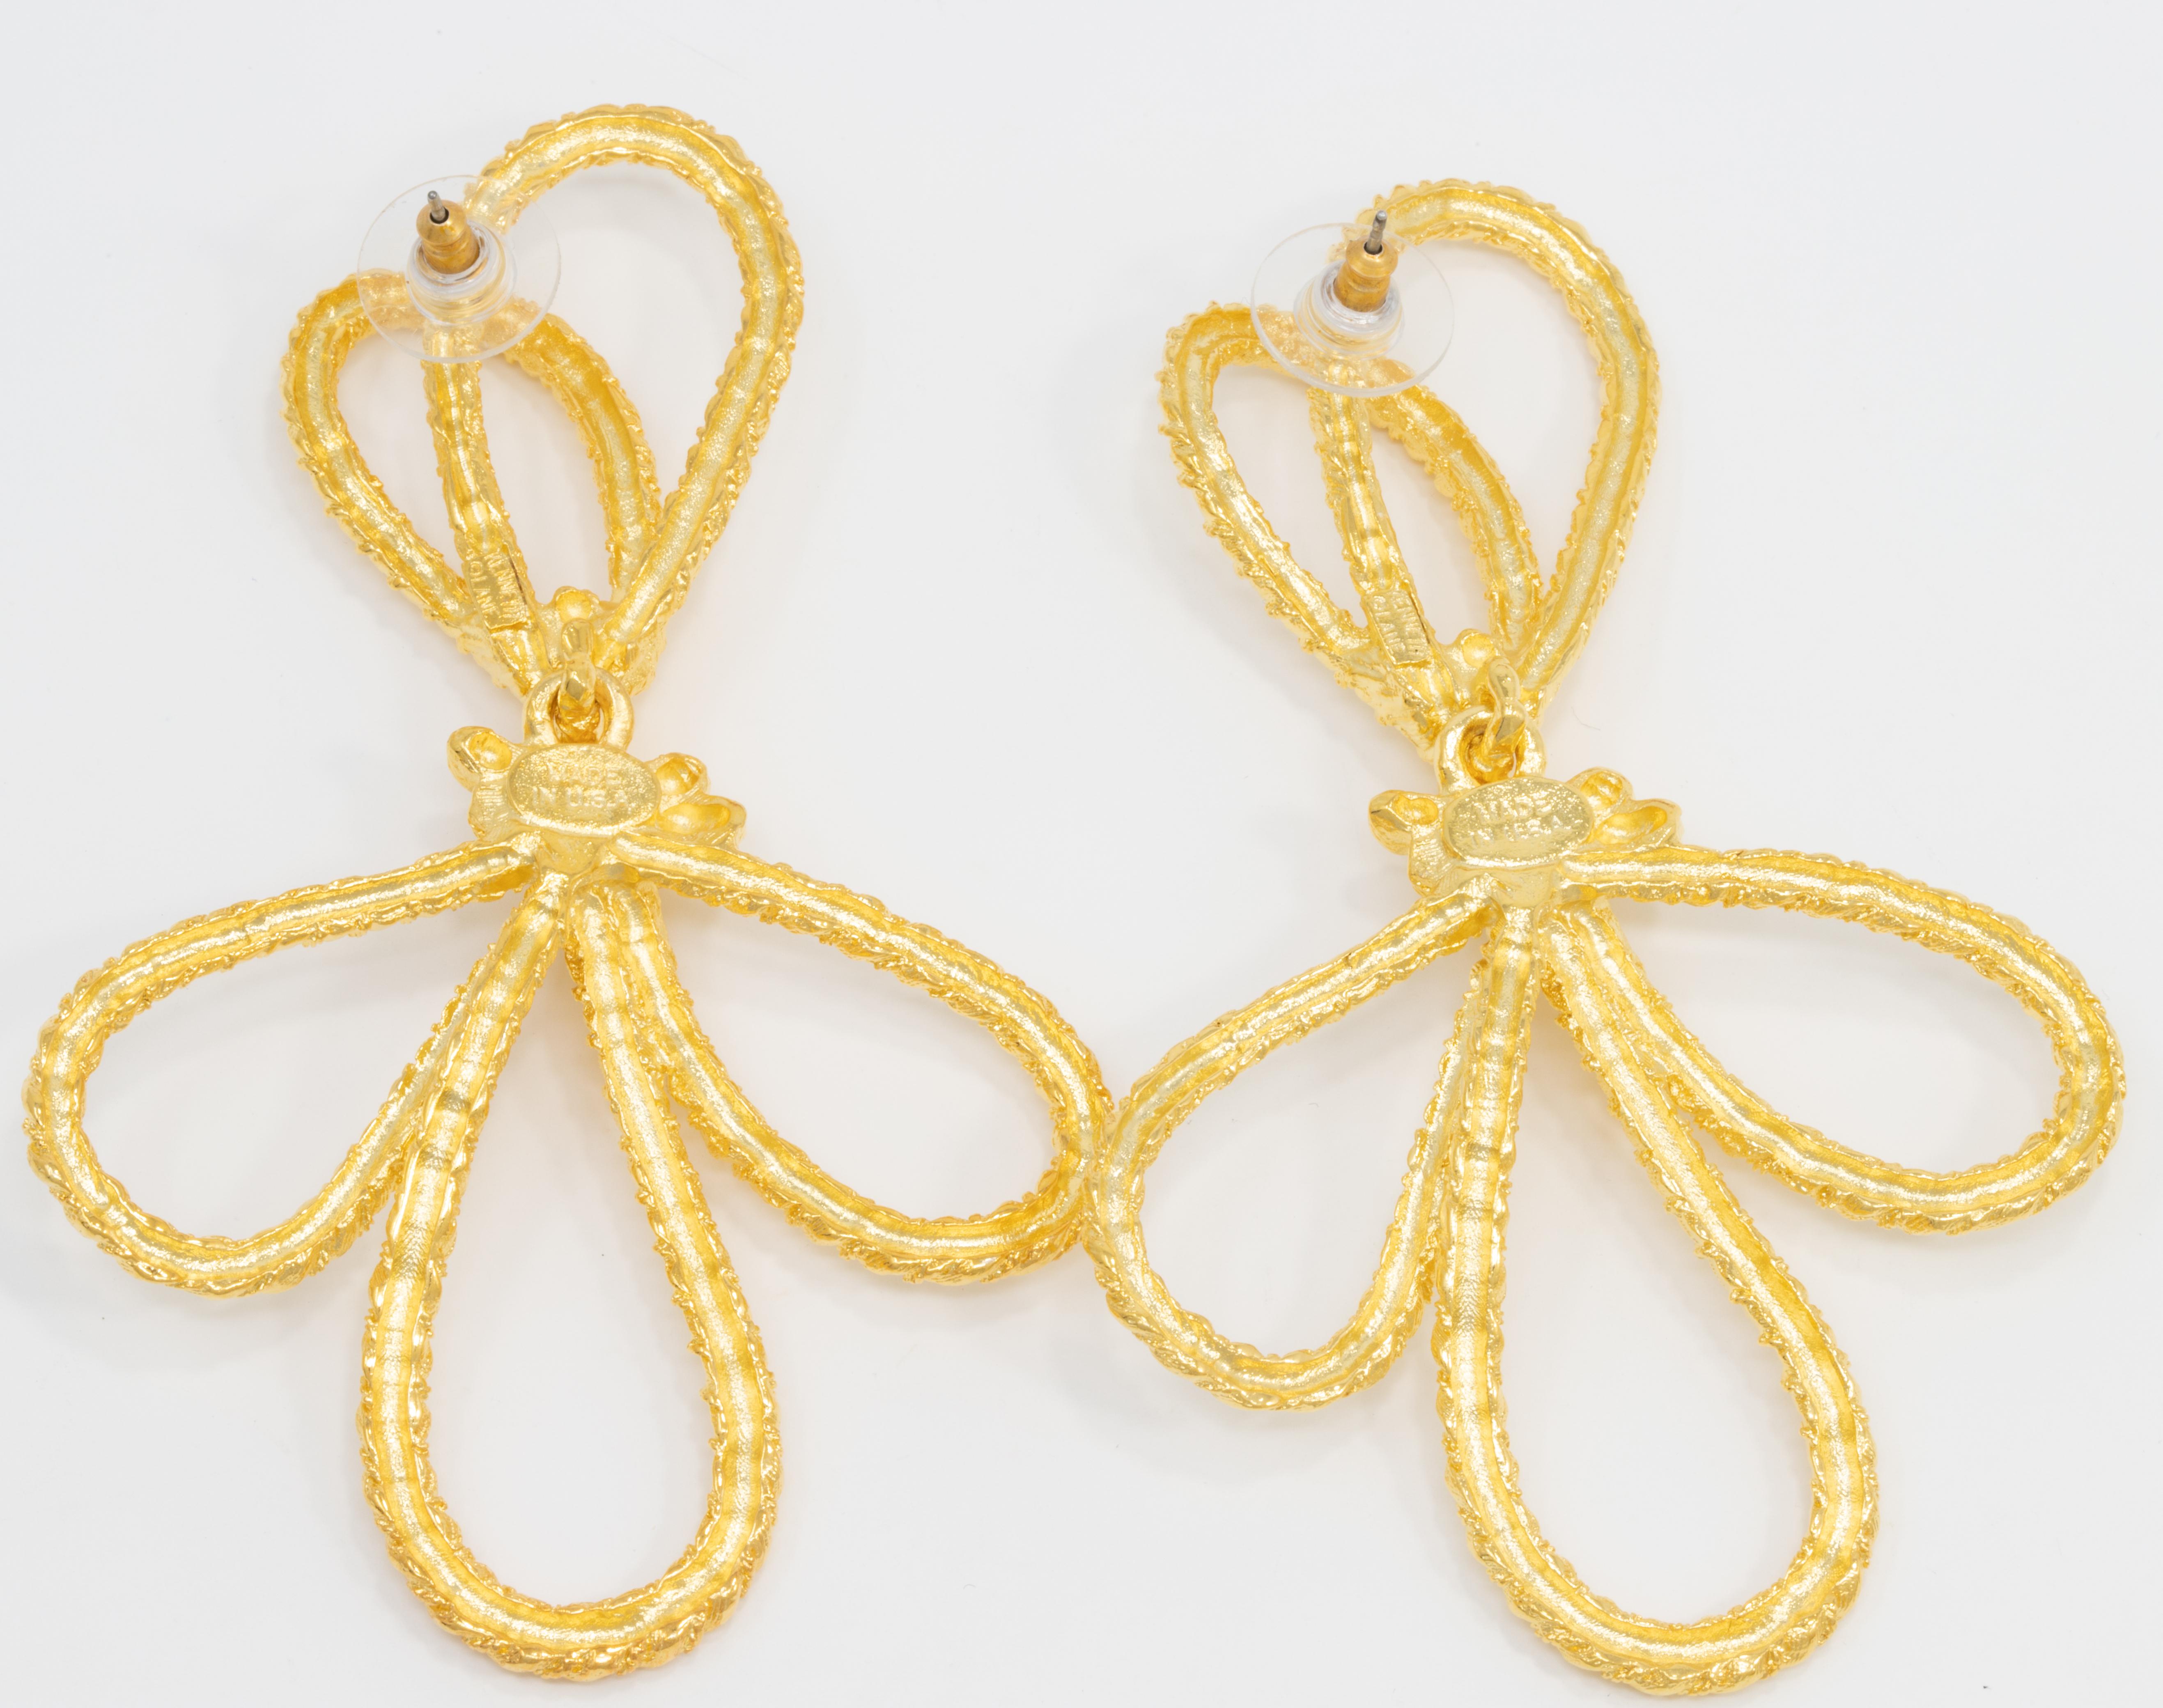 Bright gold-plated threads are tied into knotted bow links on these stylish Kenneth Jay Lane Necklace dangle earrings.

Tags, Marks, Hallmarks: Kenneth © Lane, Made in USA

Drop / dangle style with post backs